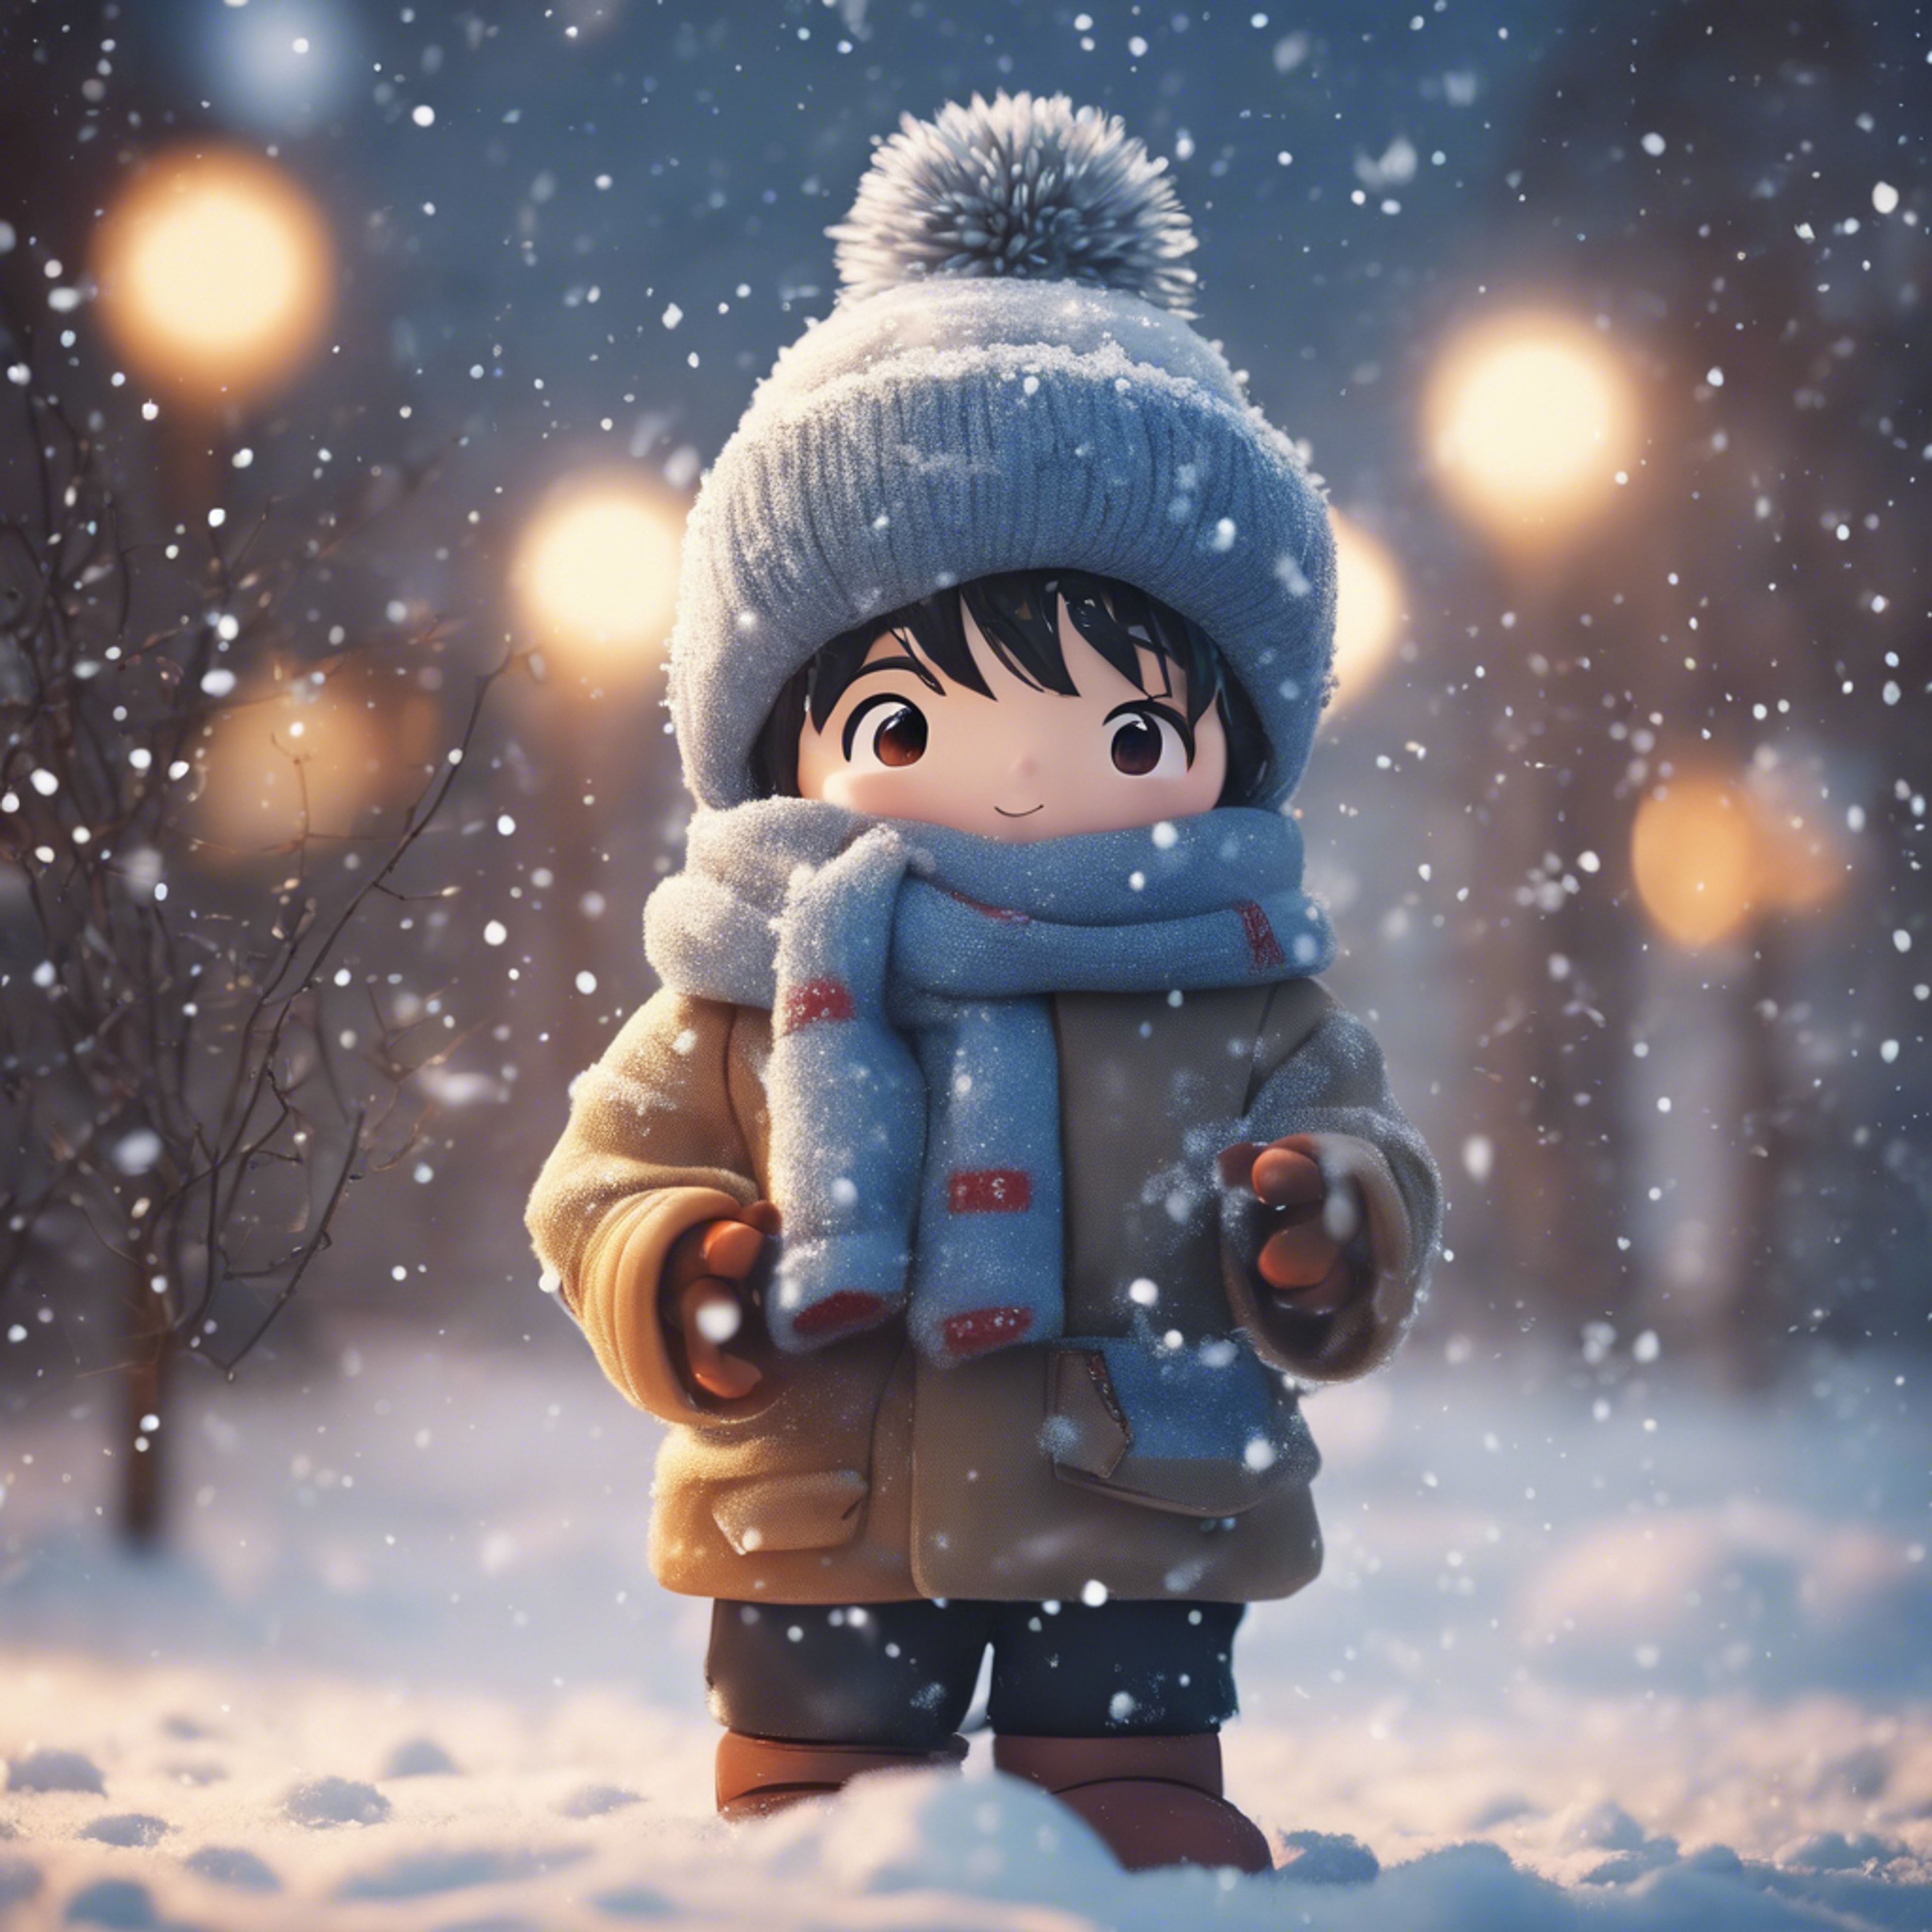 Anime boy wrapped in warm winter clothes, building a playful snowman in the snowfall. Fond d'écran[d4075dc9b13644f685e7]